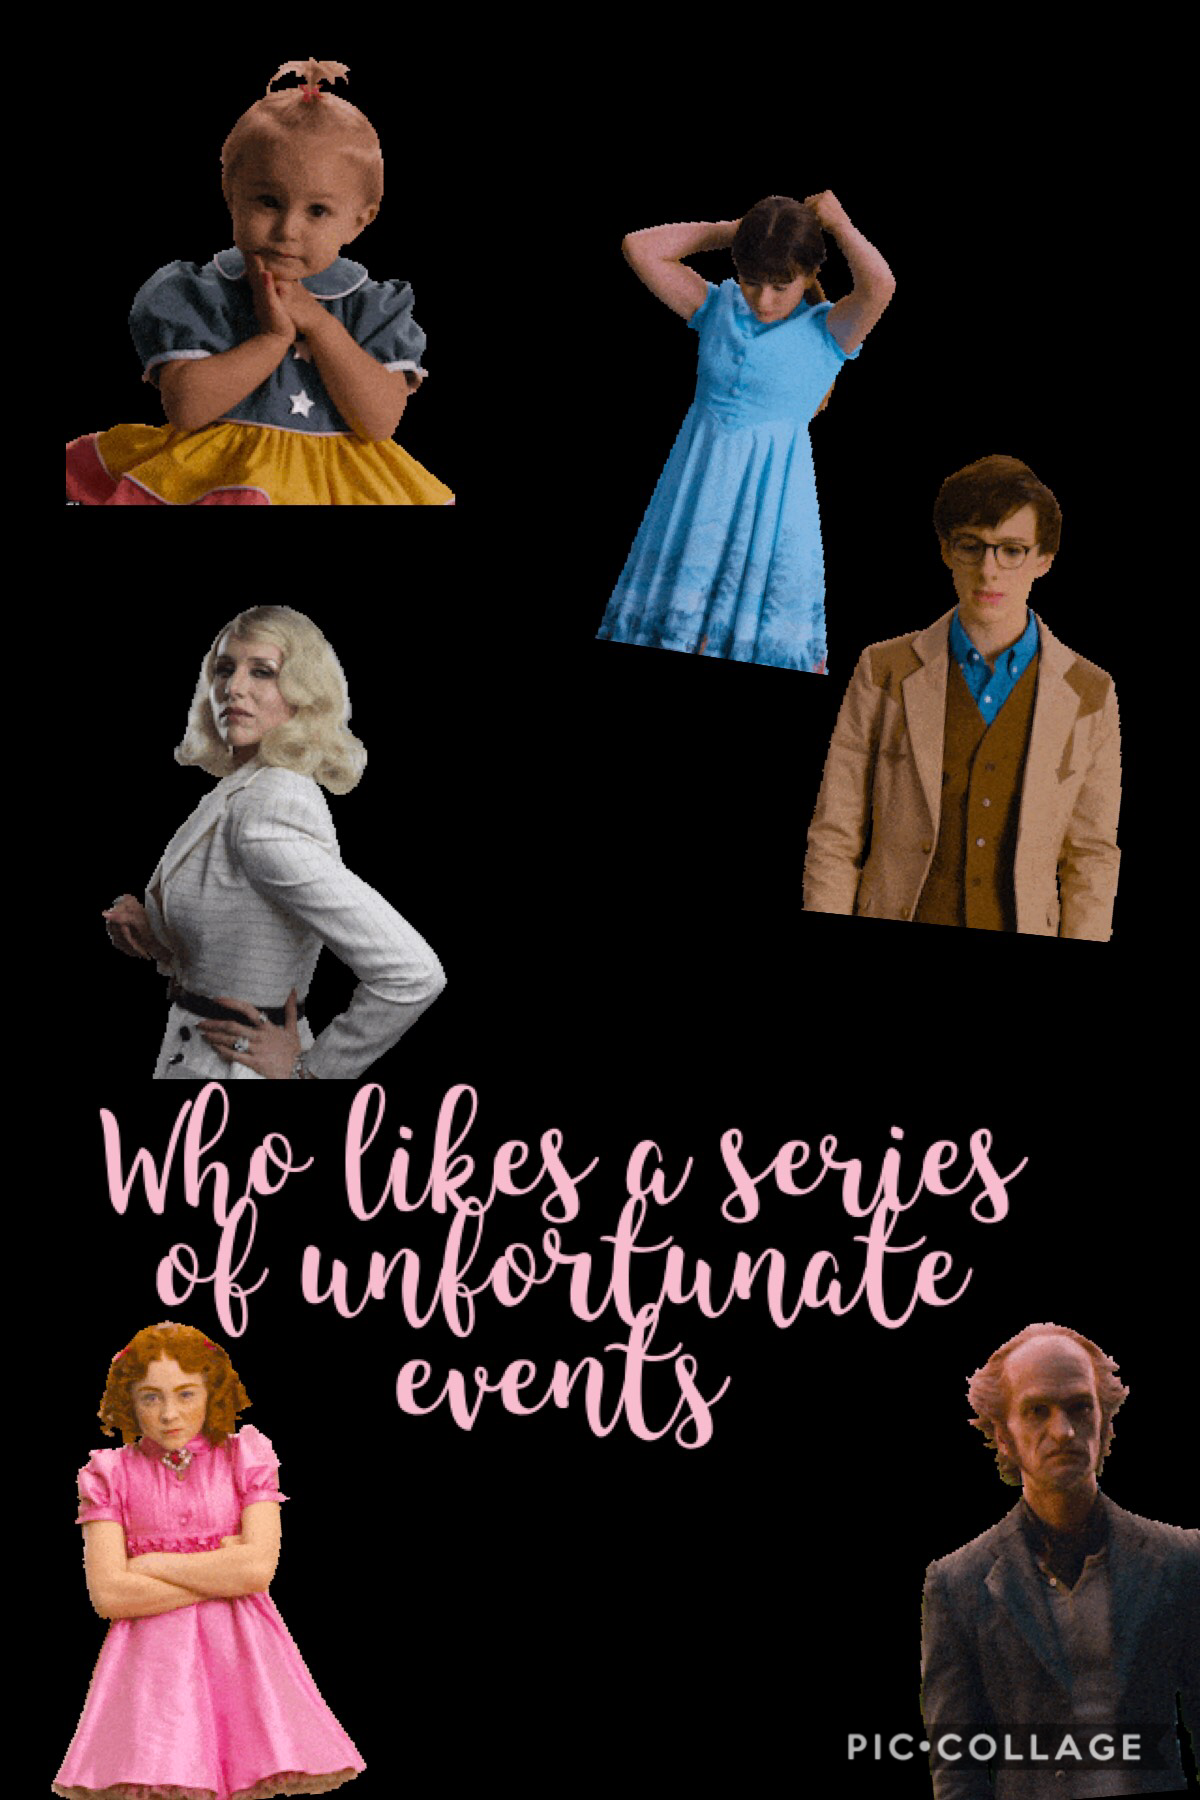 Please comment down below if you  like as series  of unfortunate events 